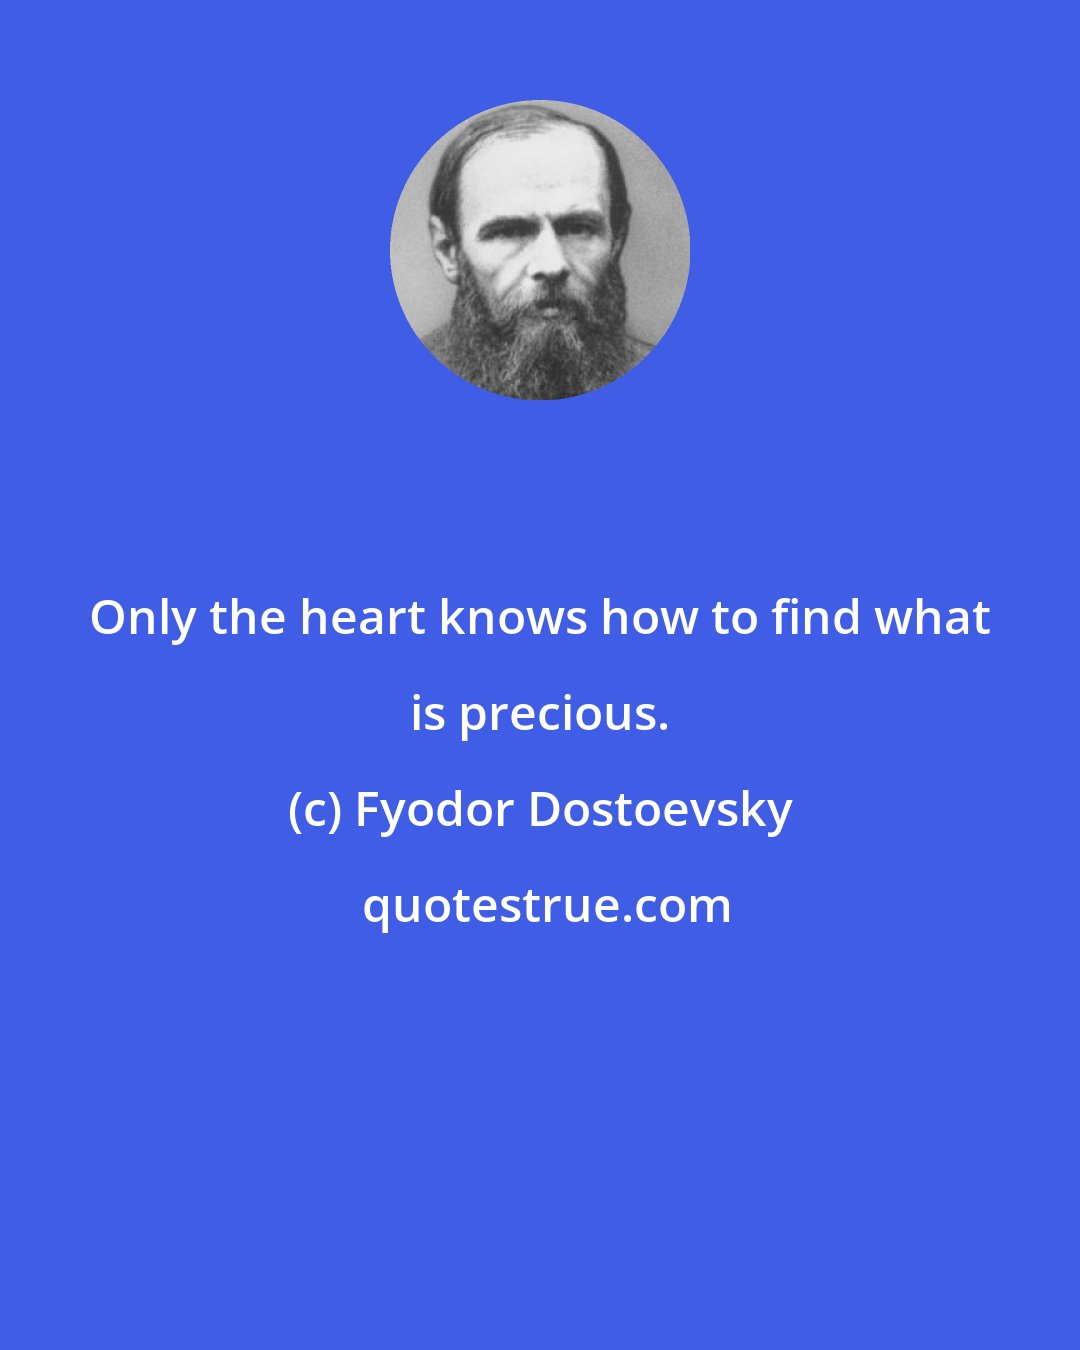 Fyodor Dostoevsky: Only the heart knows how to find what is precious.